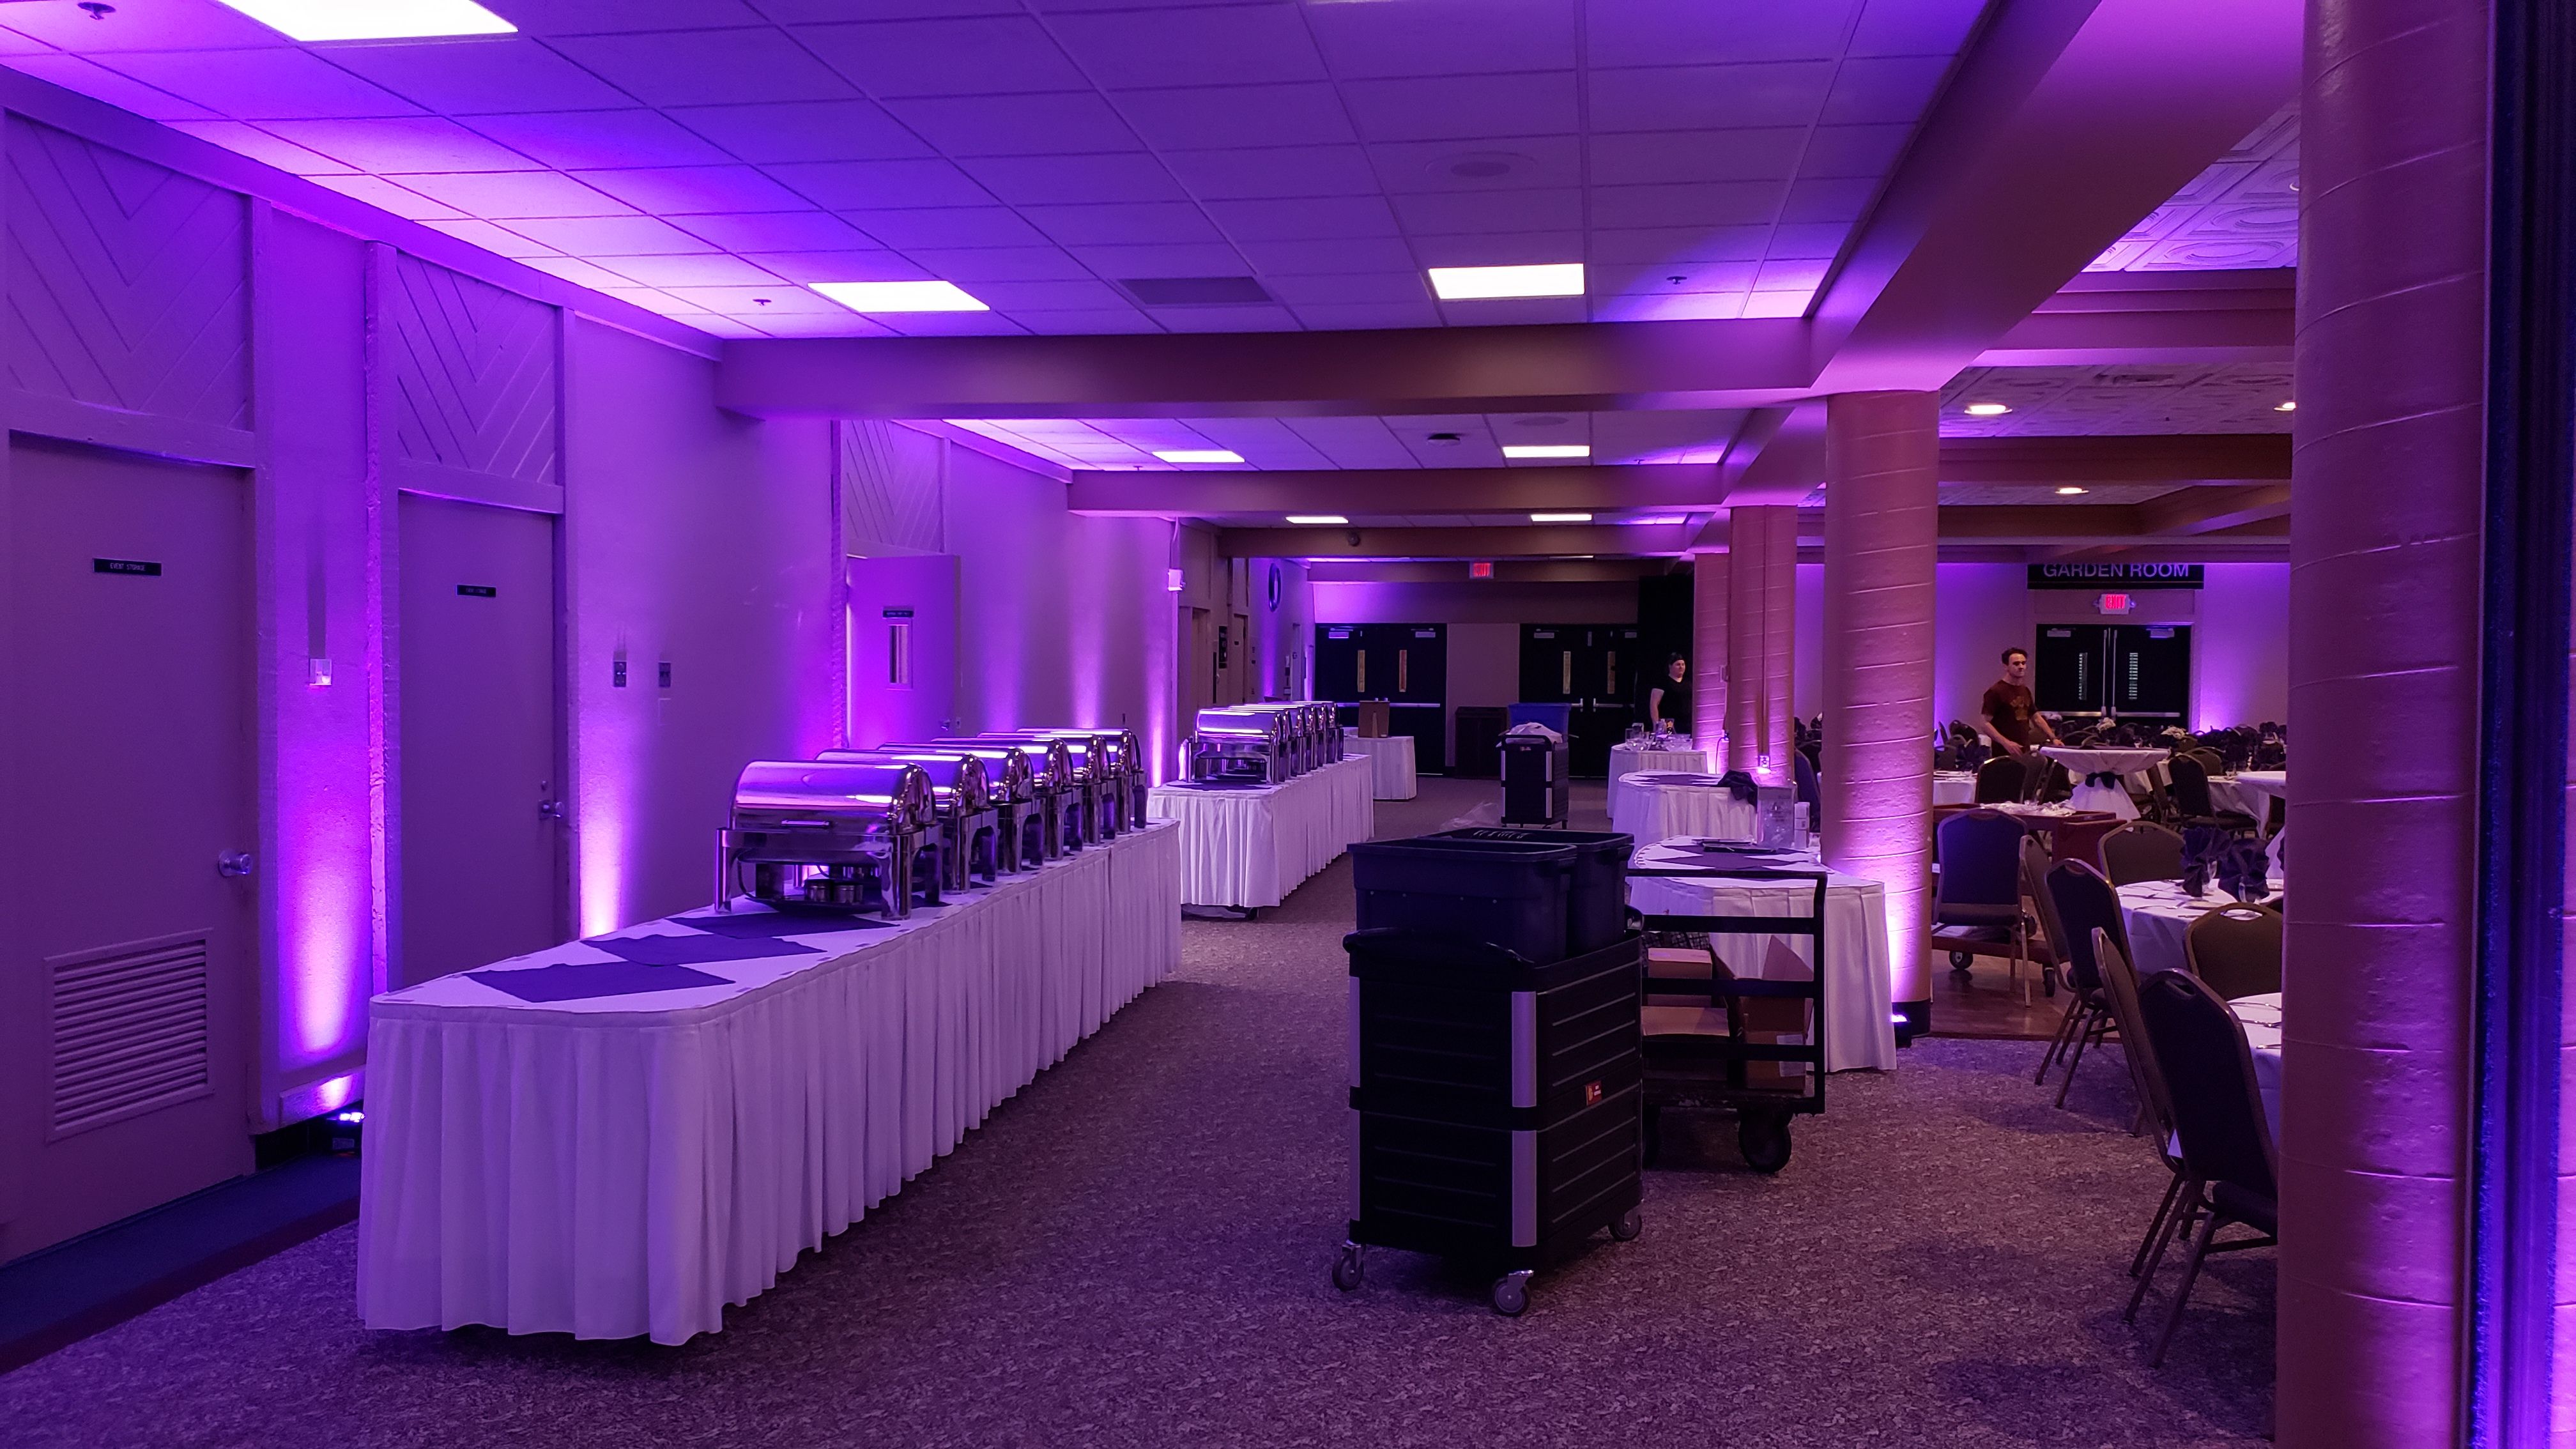 Up lighting in purple for a wedding in Kirby Ballroom.